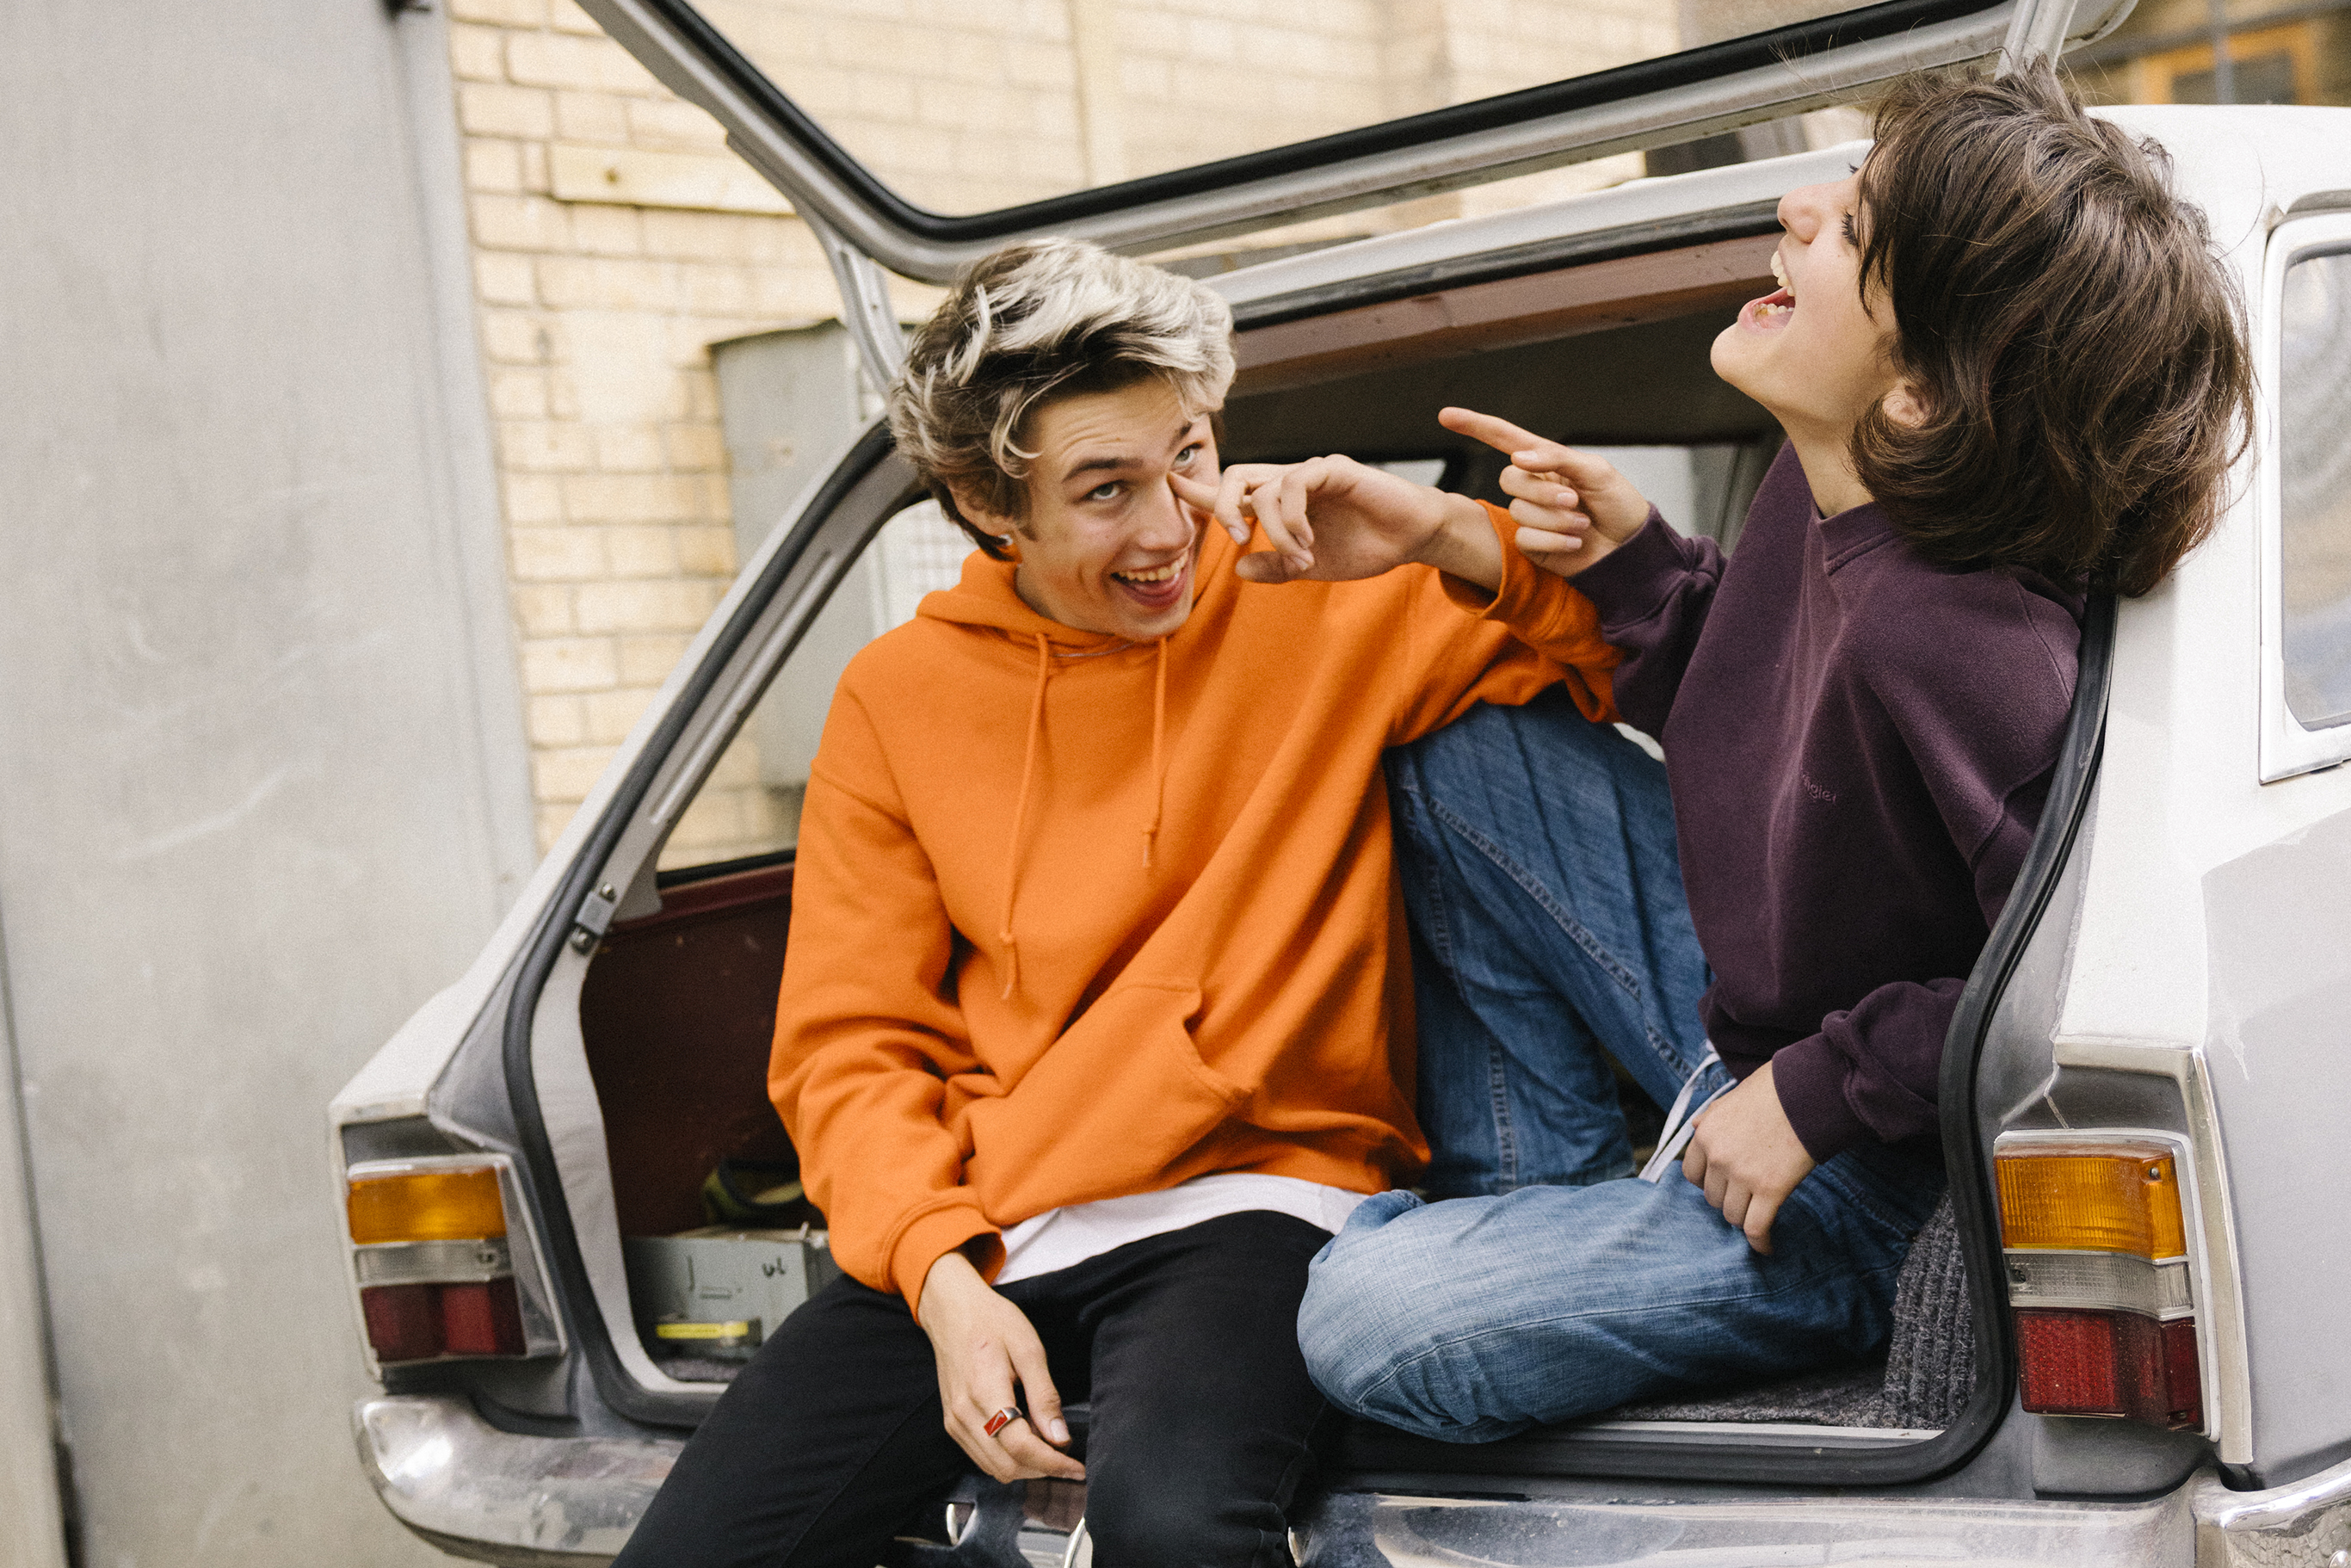 Two young people sit laughing in the open boot of a car.